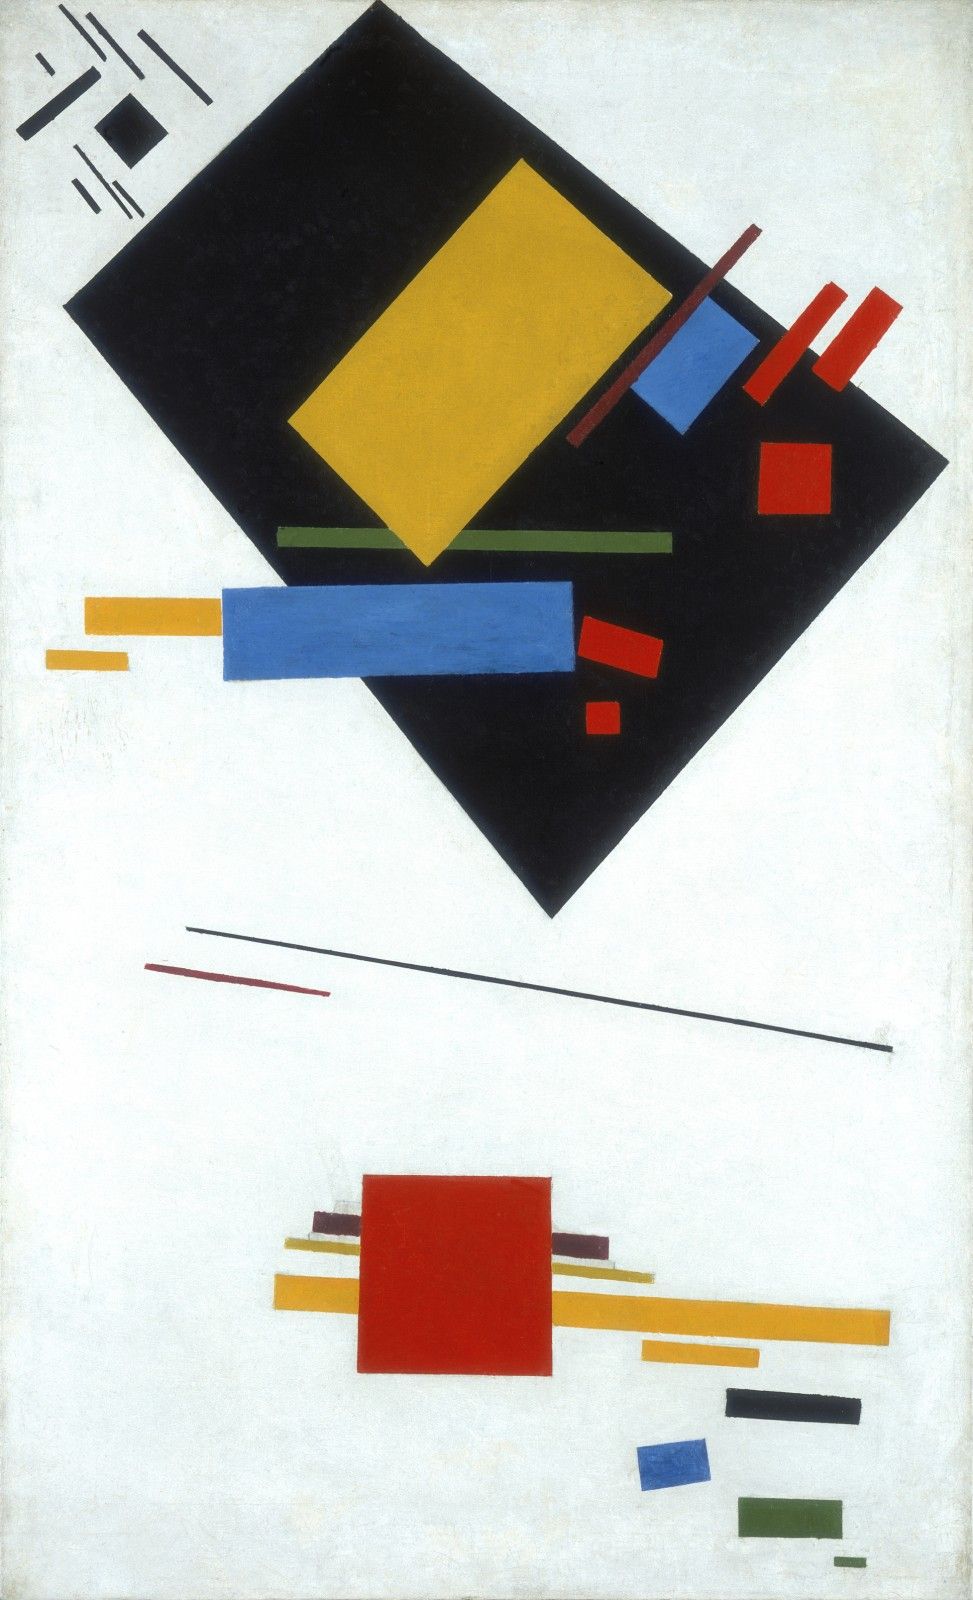 Kazimir Malevich, Suprematist Painting (with Black Trapezium and Red Square), 1915
Stedelijk Museum, Amsterdam